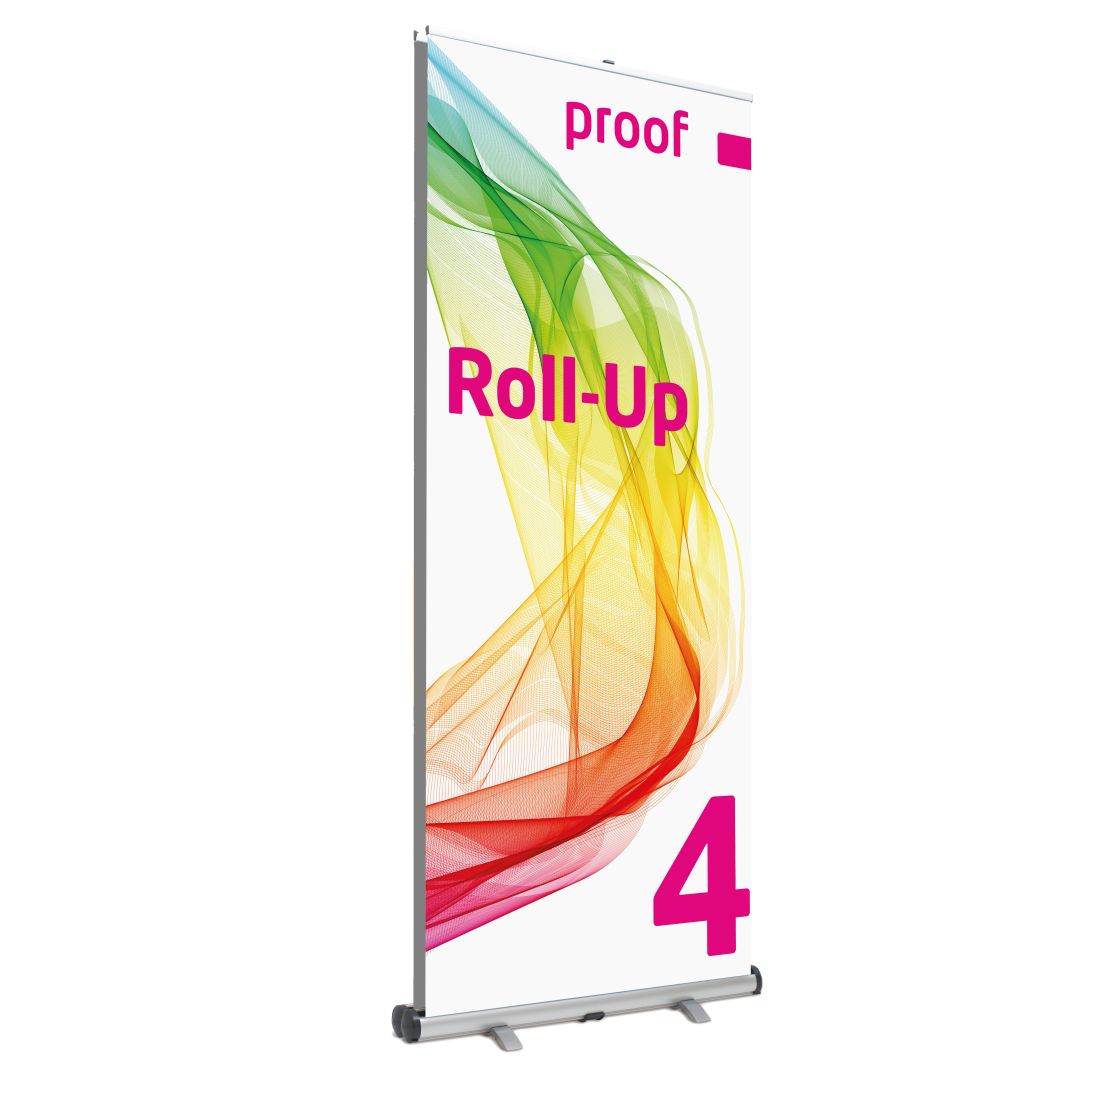 Proof.de farbverbindliches Roll-Up 4 in Proof-Qualität - Front